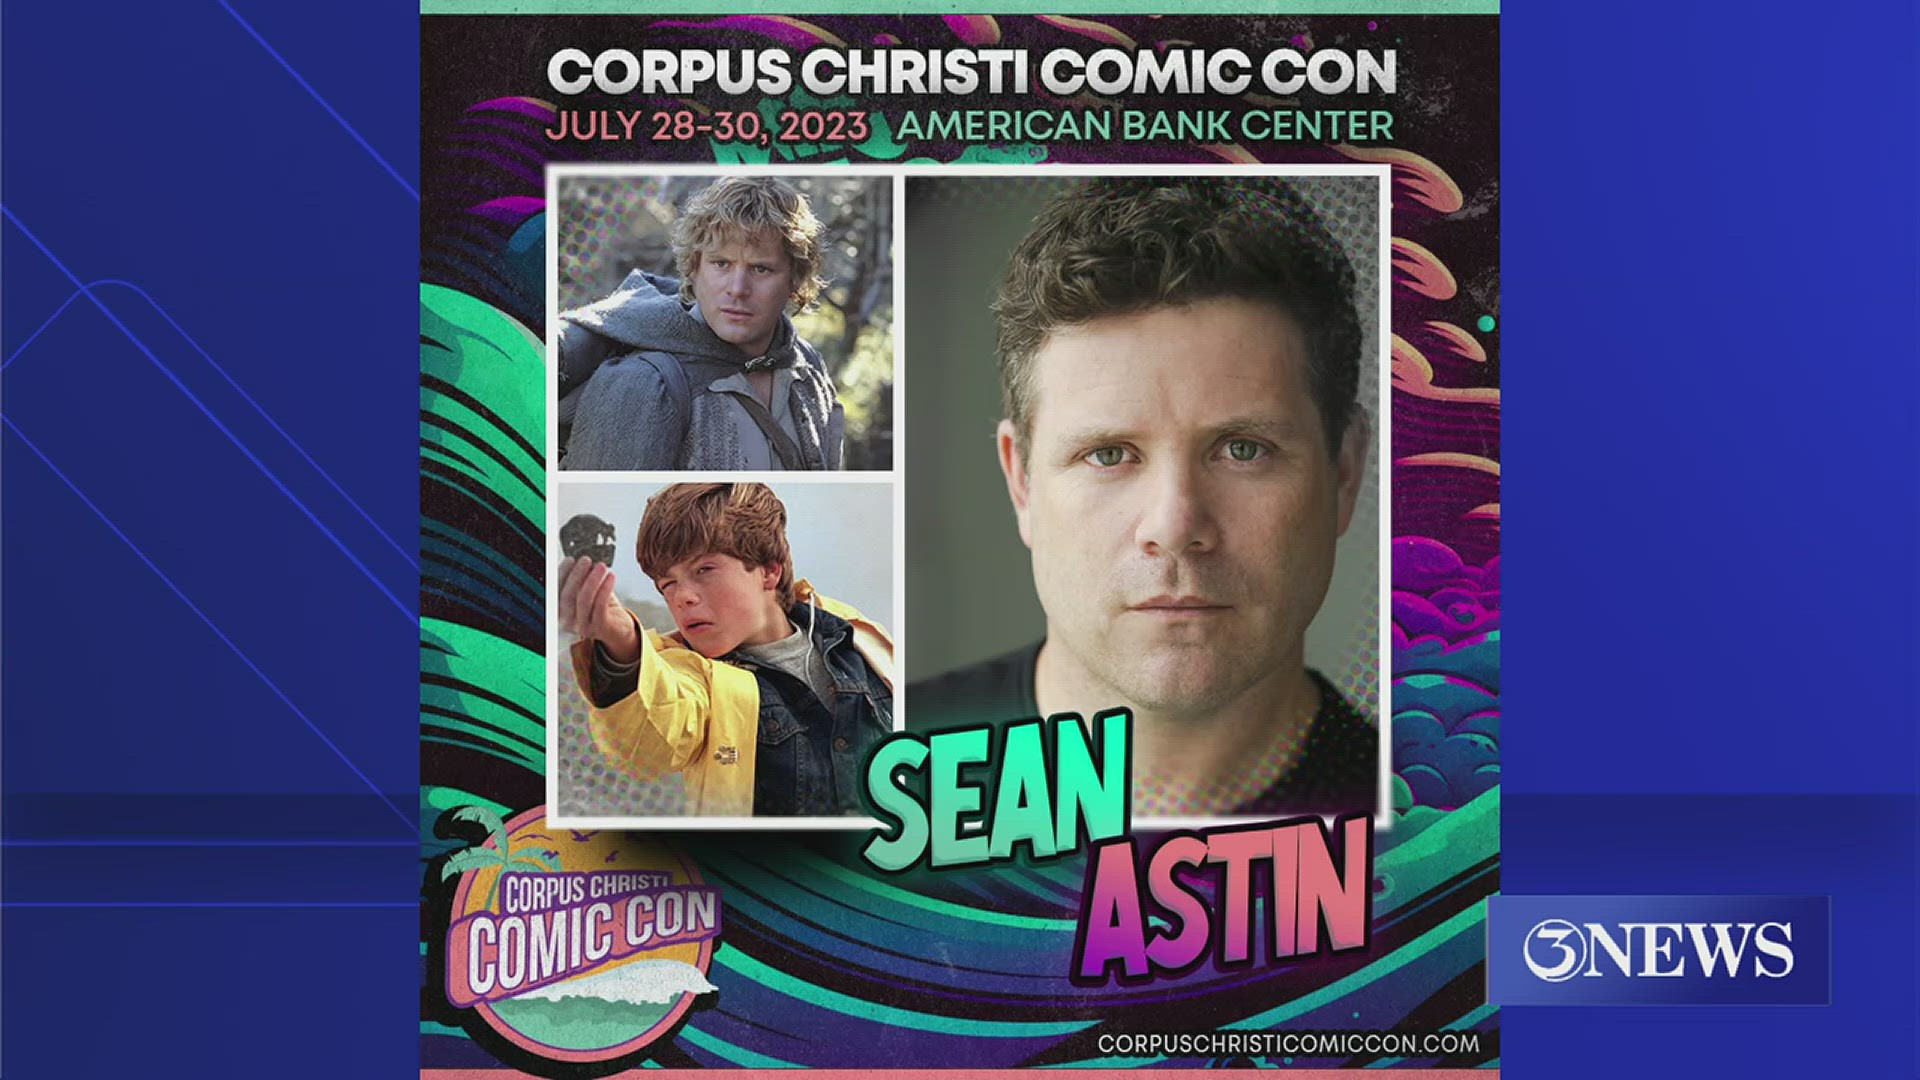 Corpus Christi Comic Con - Corpus Christi Comic Con is less than 2 months  away! Don't wait! Get your tickets now! www.corpuschristicomiccon.com |  Facebook